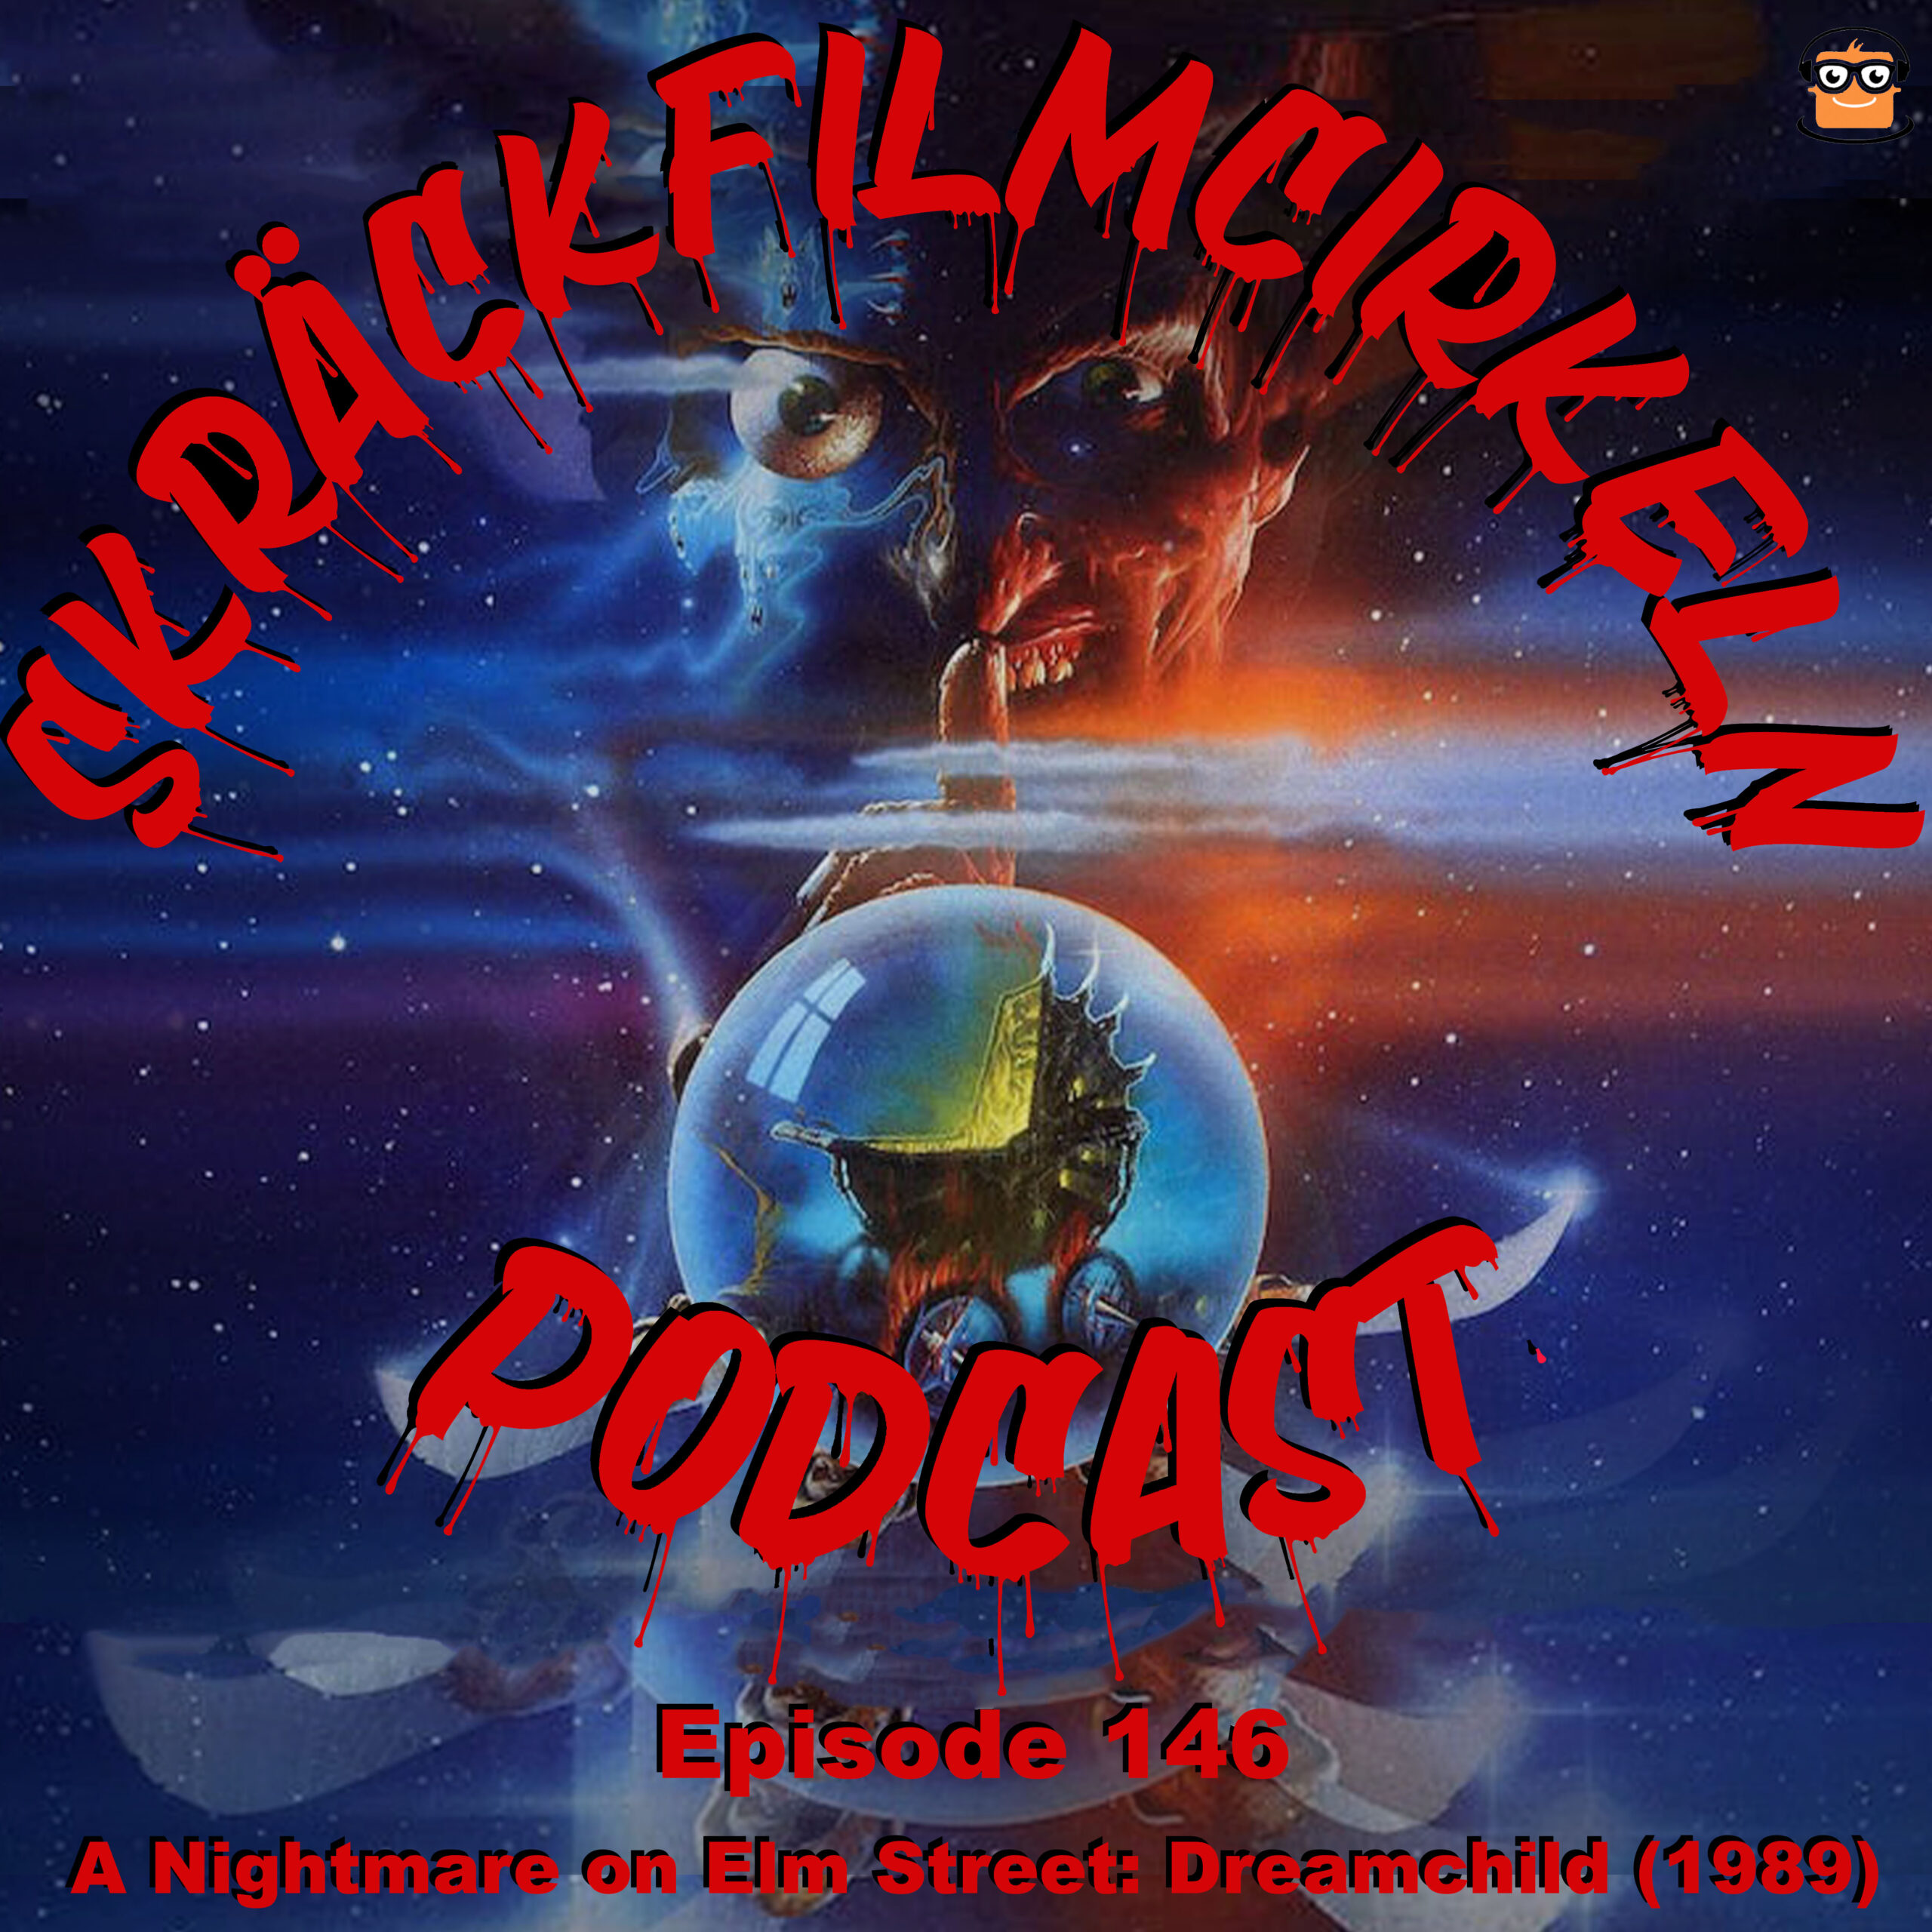 Episode 146 – A Nightmare on Elm Street – The Dream Child (1989)